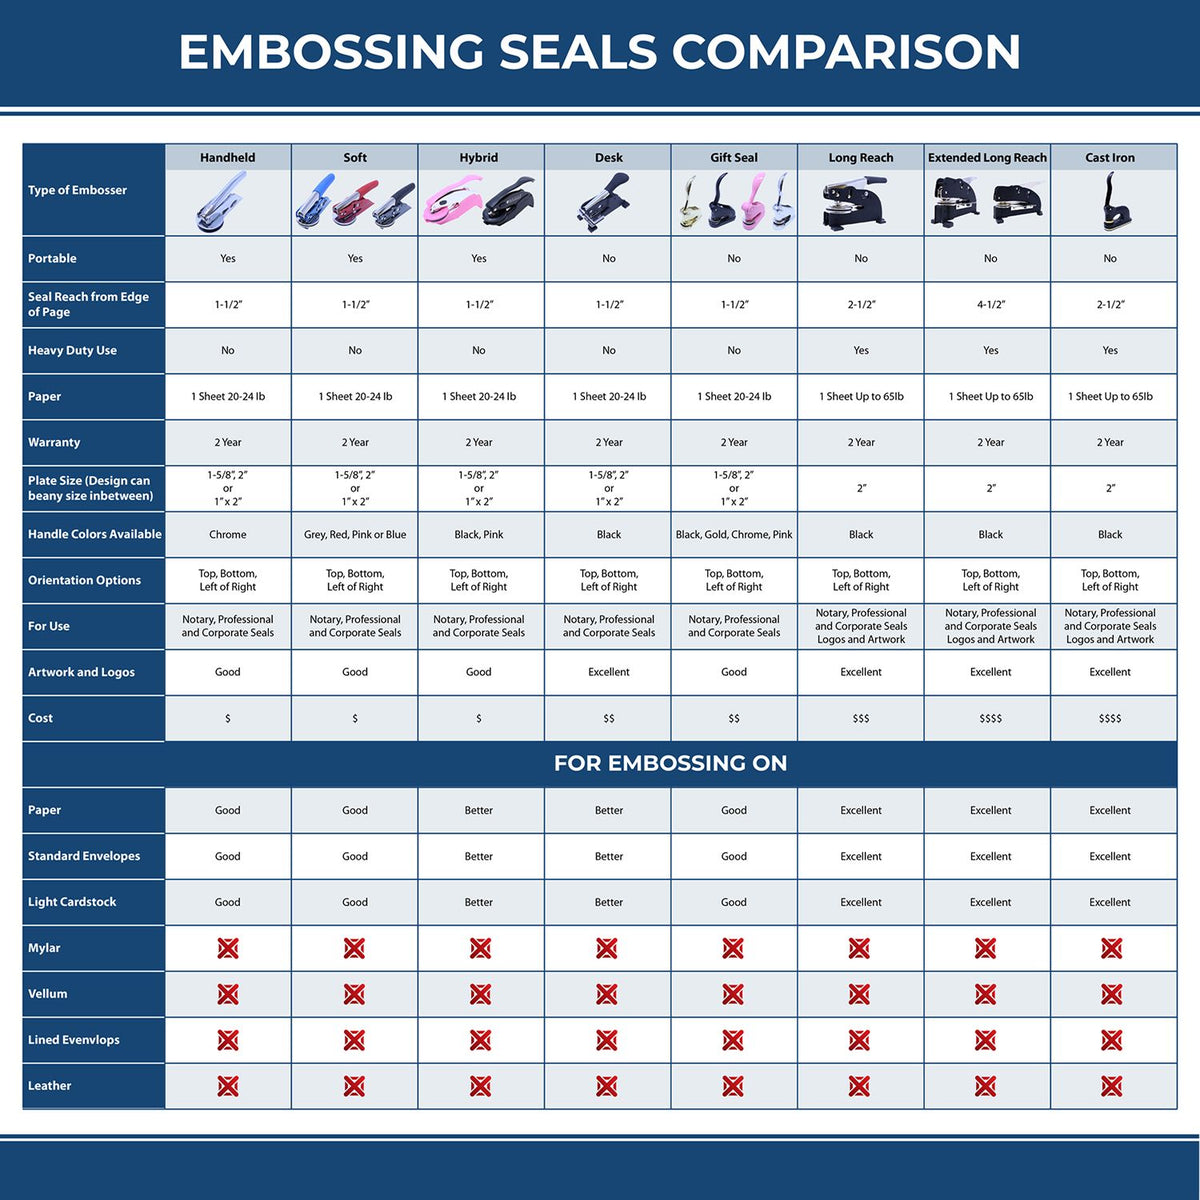 A comparison chart for the different types of mount models available for the Handheld Washington Professional Engineer Embosser.